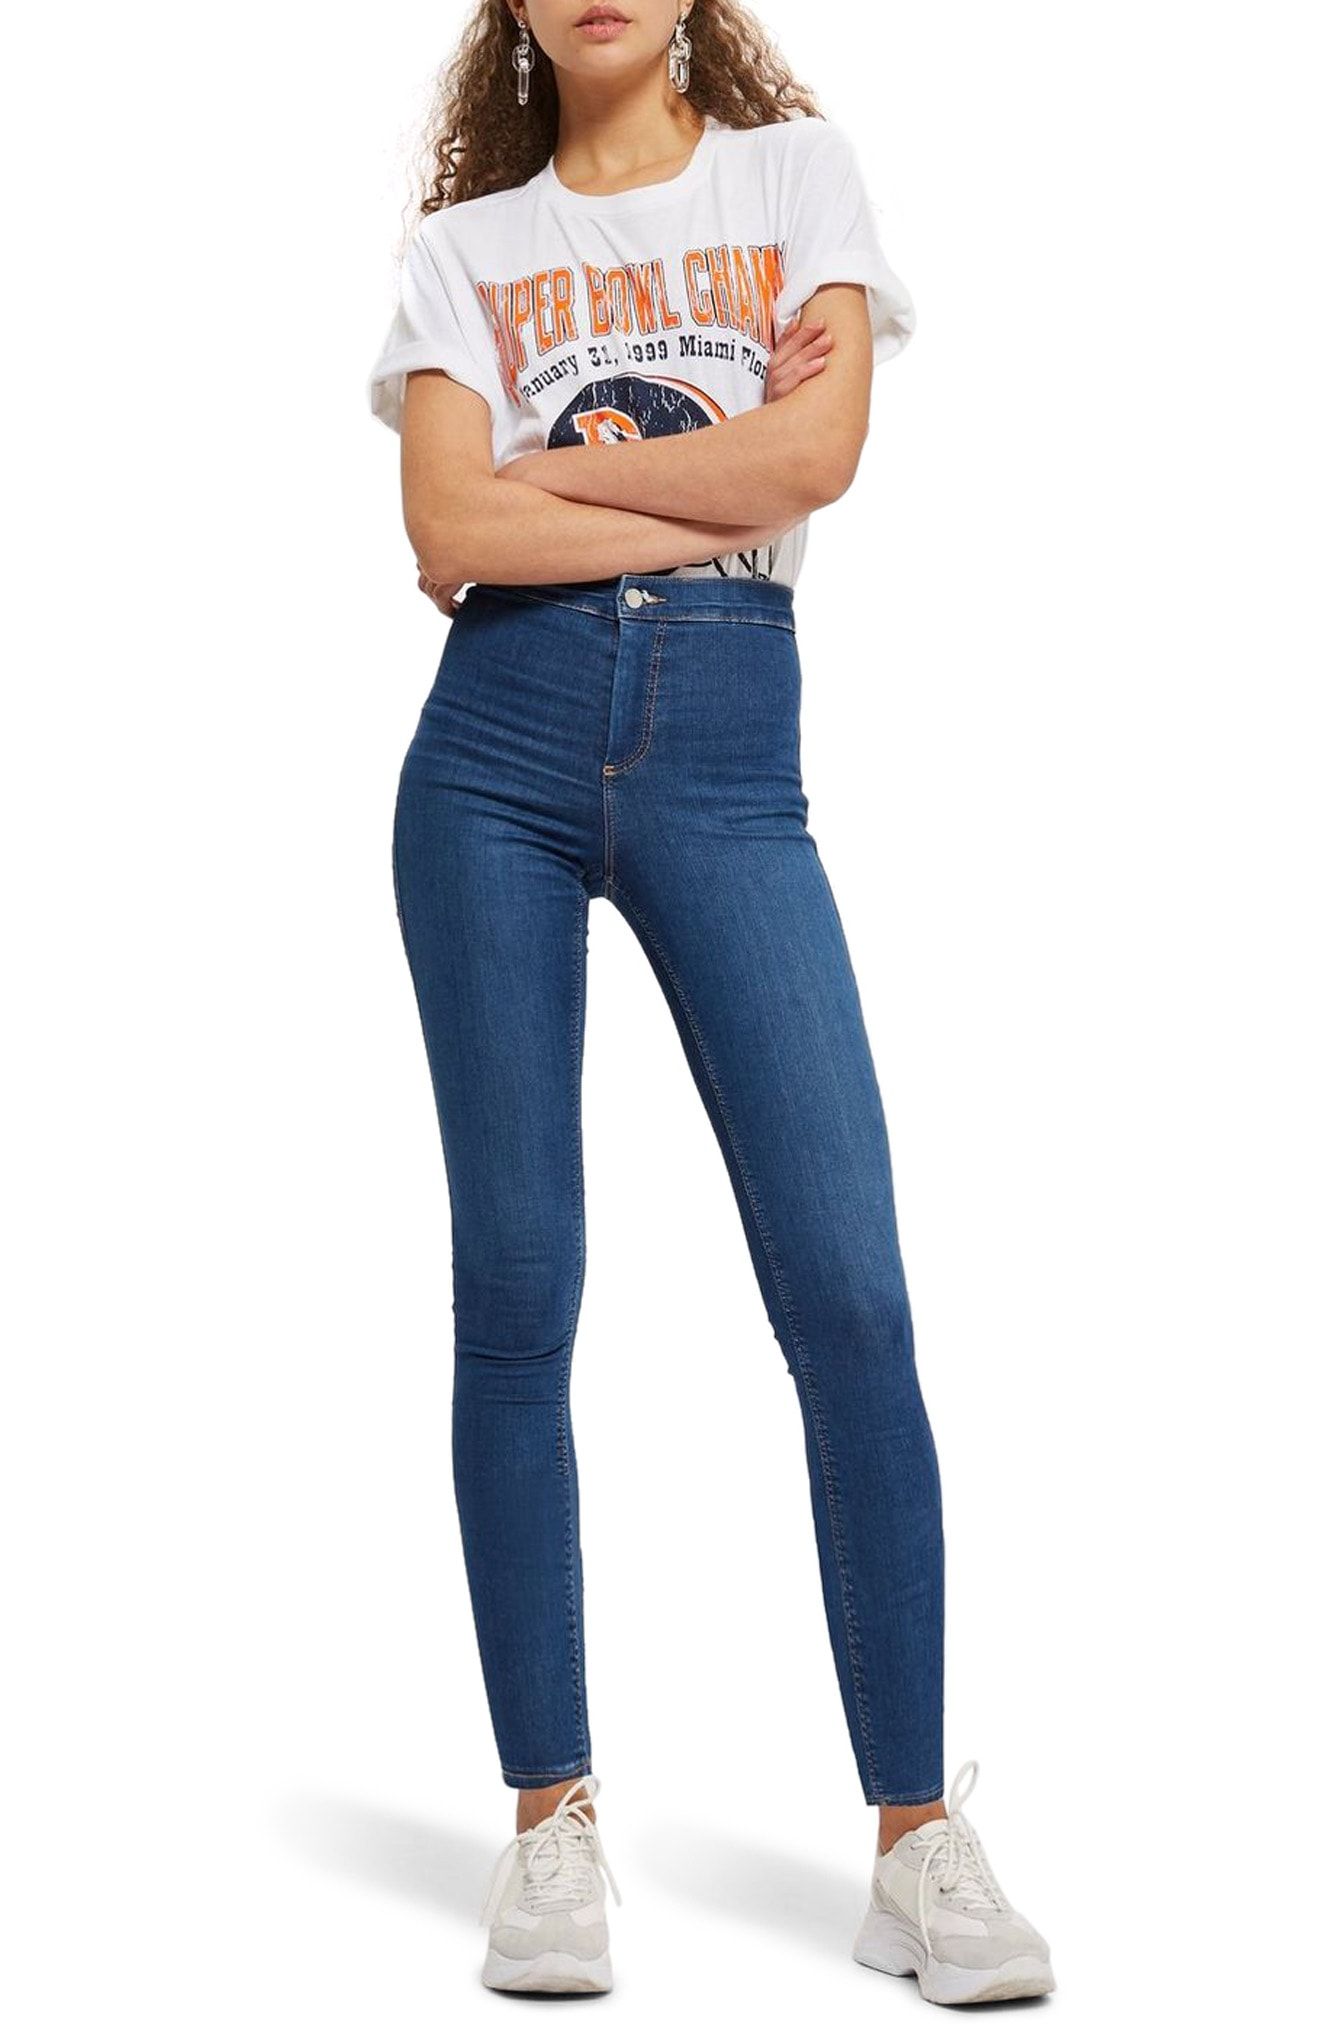 most high waisted jeans